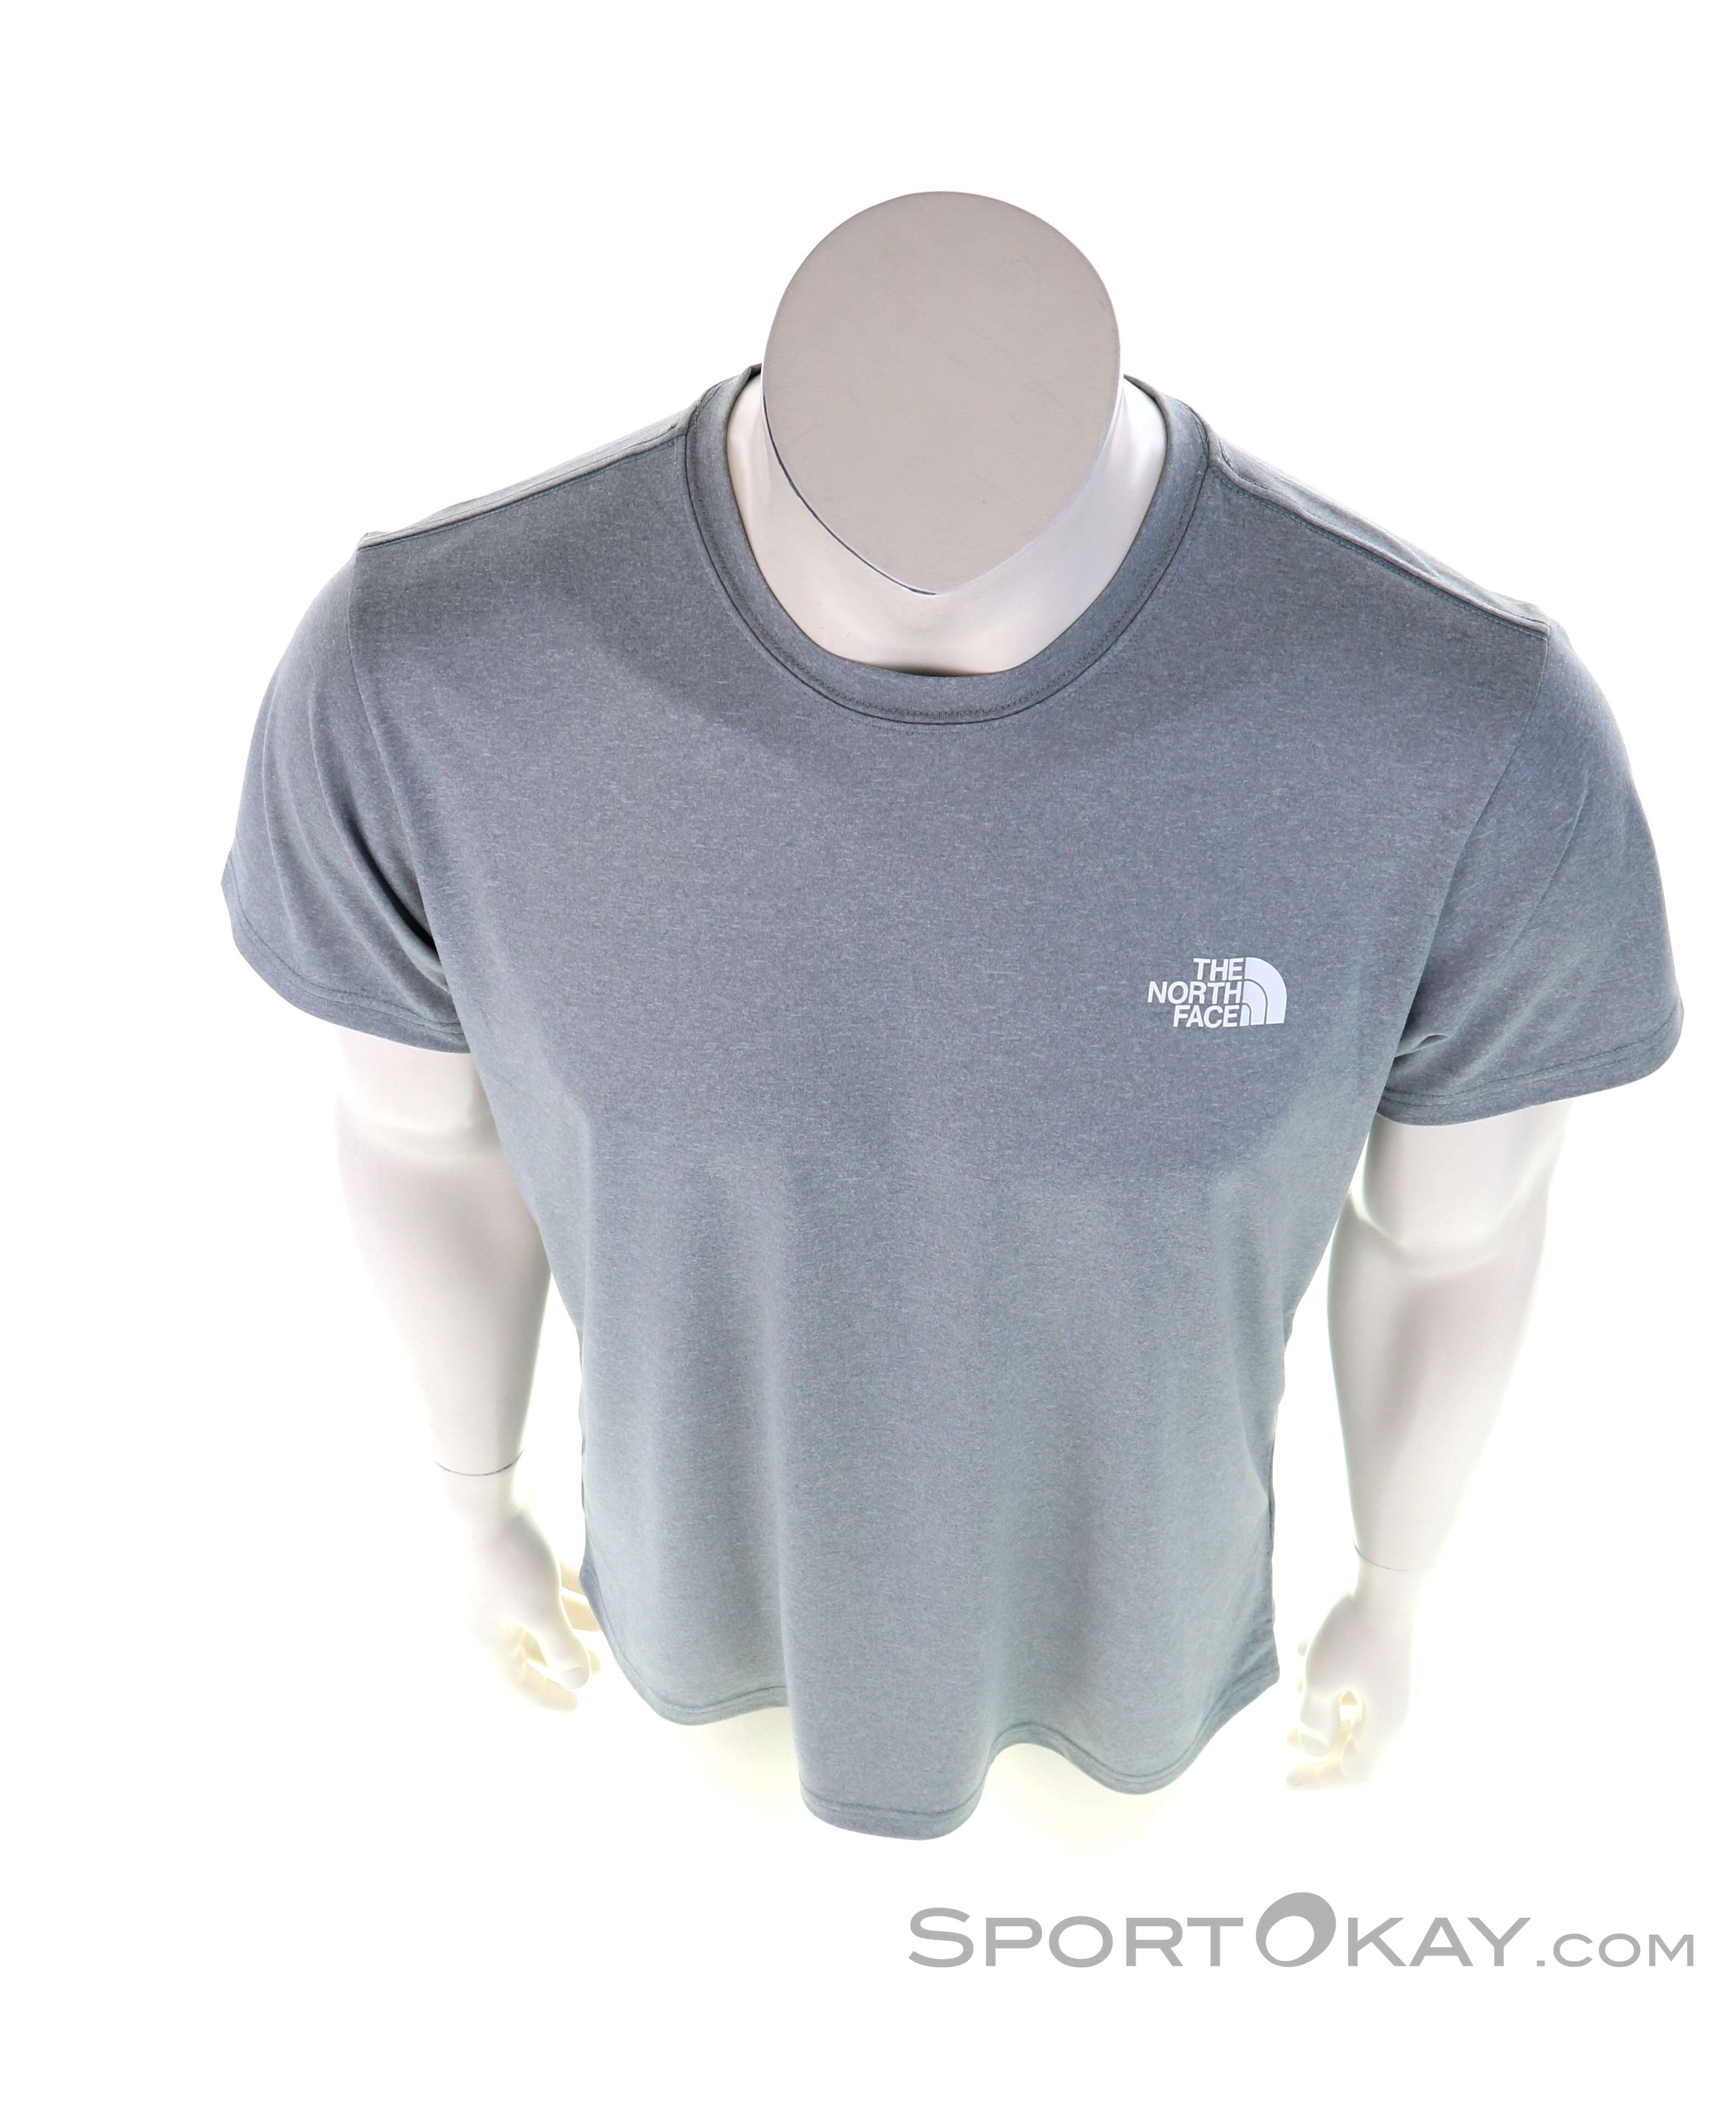 The North Face Reaxion Box All T-Shirt Fitness Mens Clothing Shirts Fitness - - Tee - - T-Shirts 